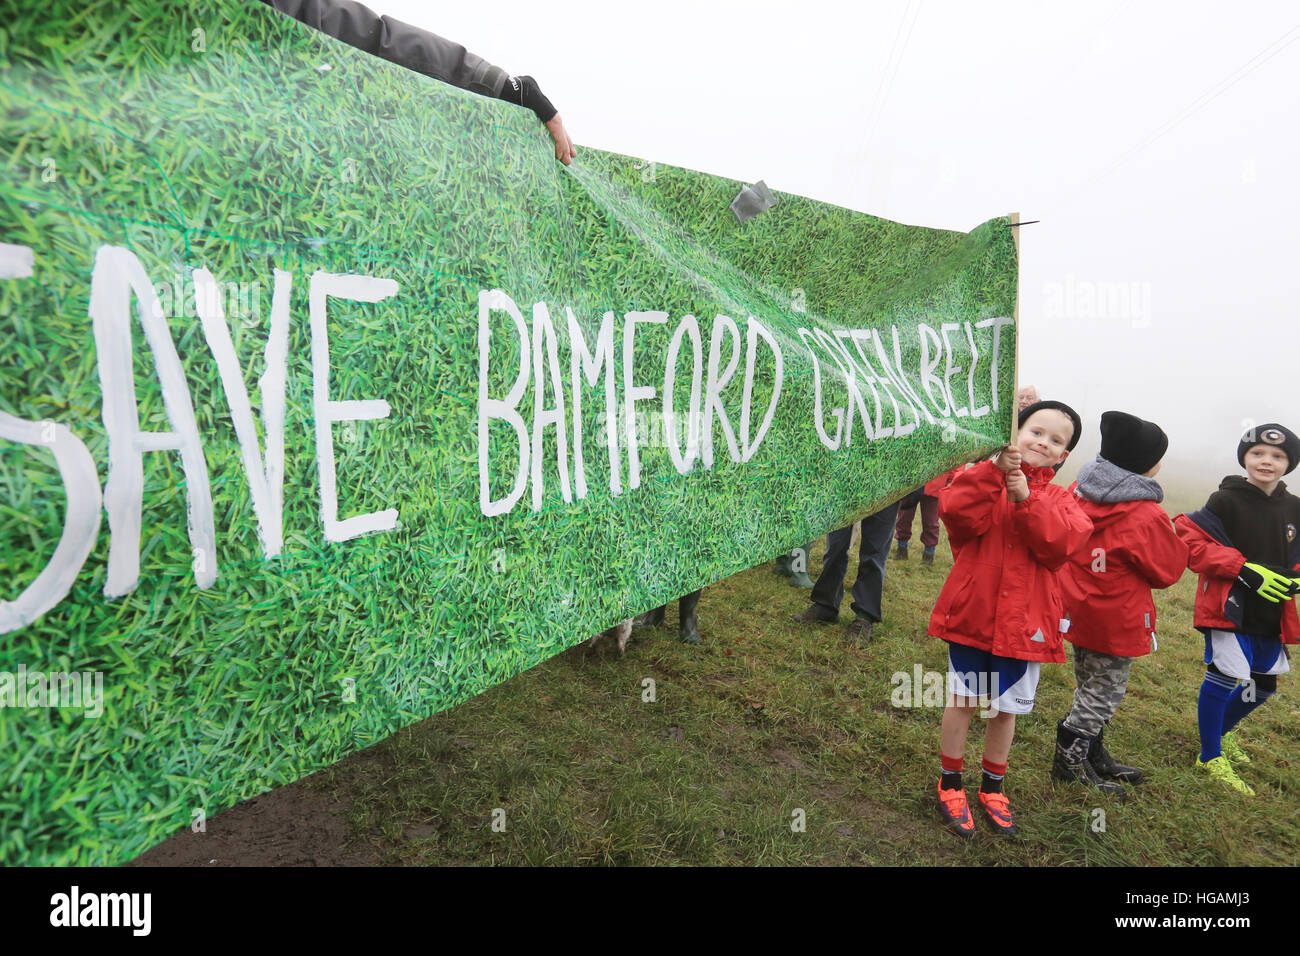 Rochdale, Lancashire, UK. 7th January, 2017. A youngster holding a banner which reads 'Save Bamford green Belt', Bamford, Rochdale, 7th January, 2017  © Barbara Cook/Alamy Live News Stock Photo